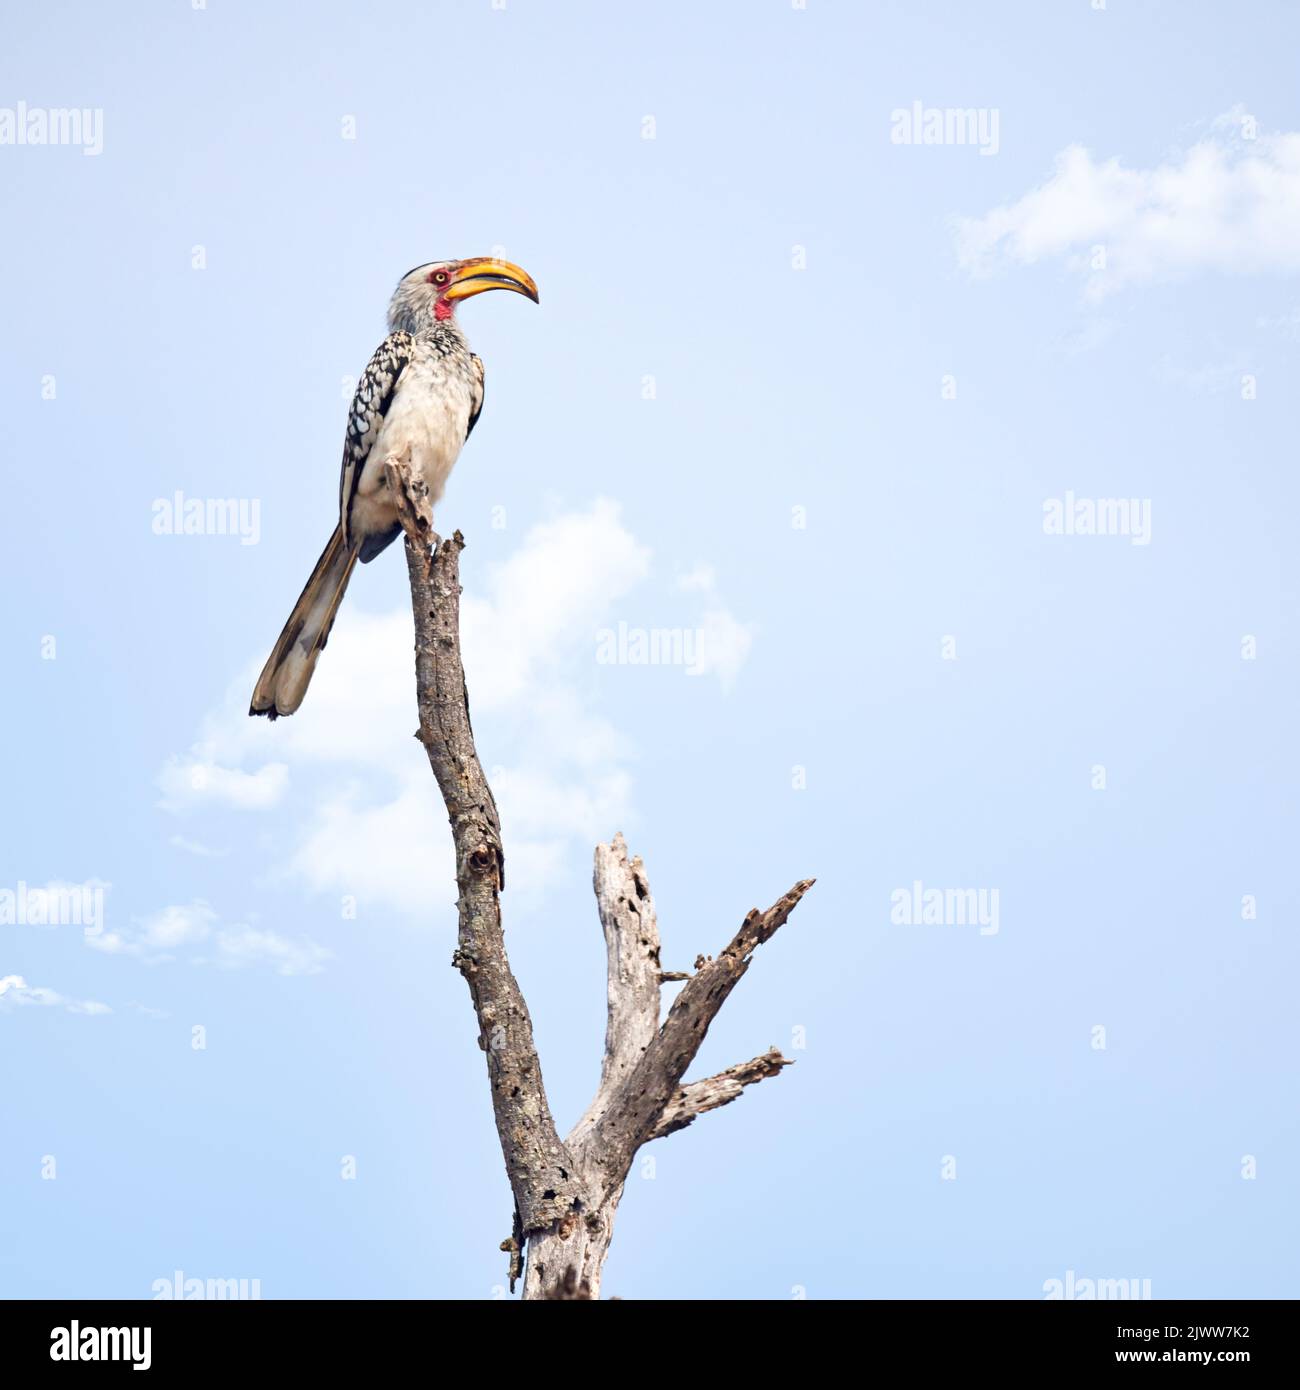 On his perch. Full length shot of a Southern Red-Billed Hornbill perched on a branch. Stock Photo